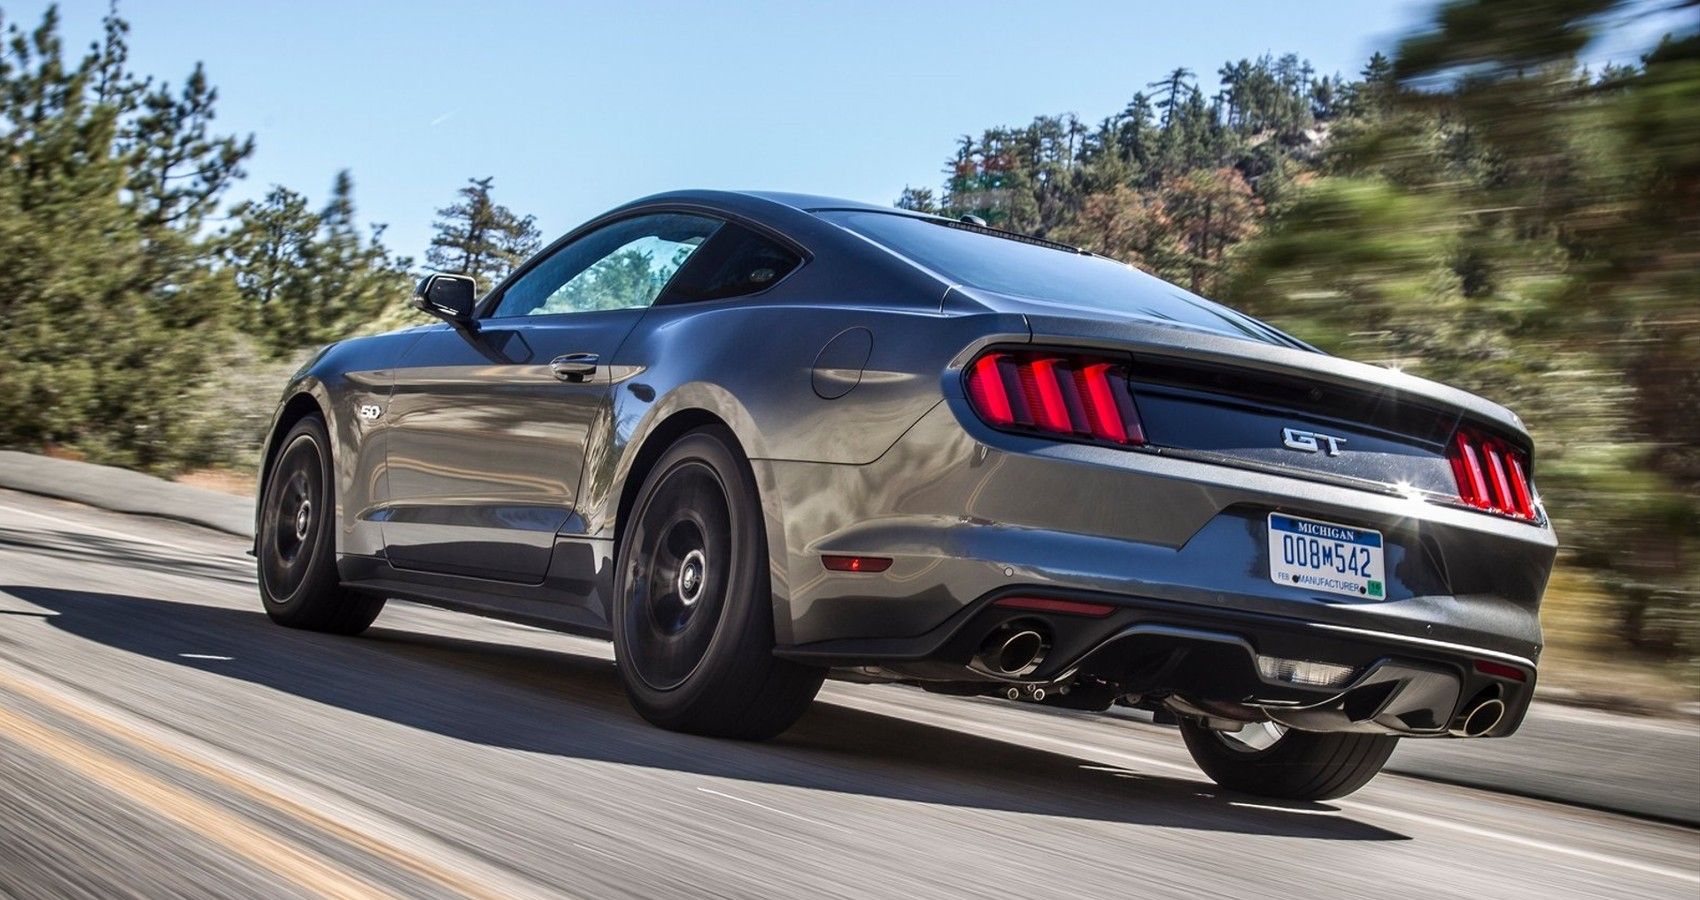 Gray 2015 Ford Mustang GT